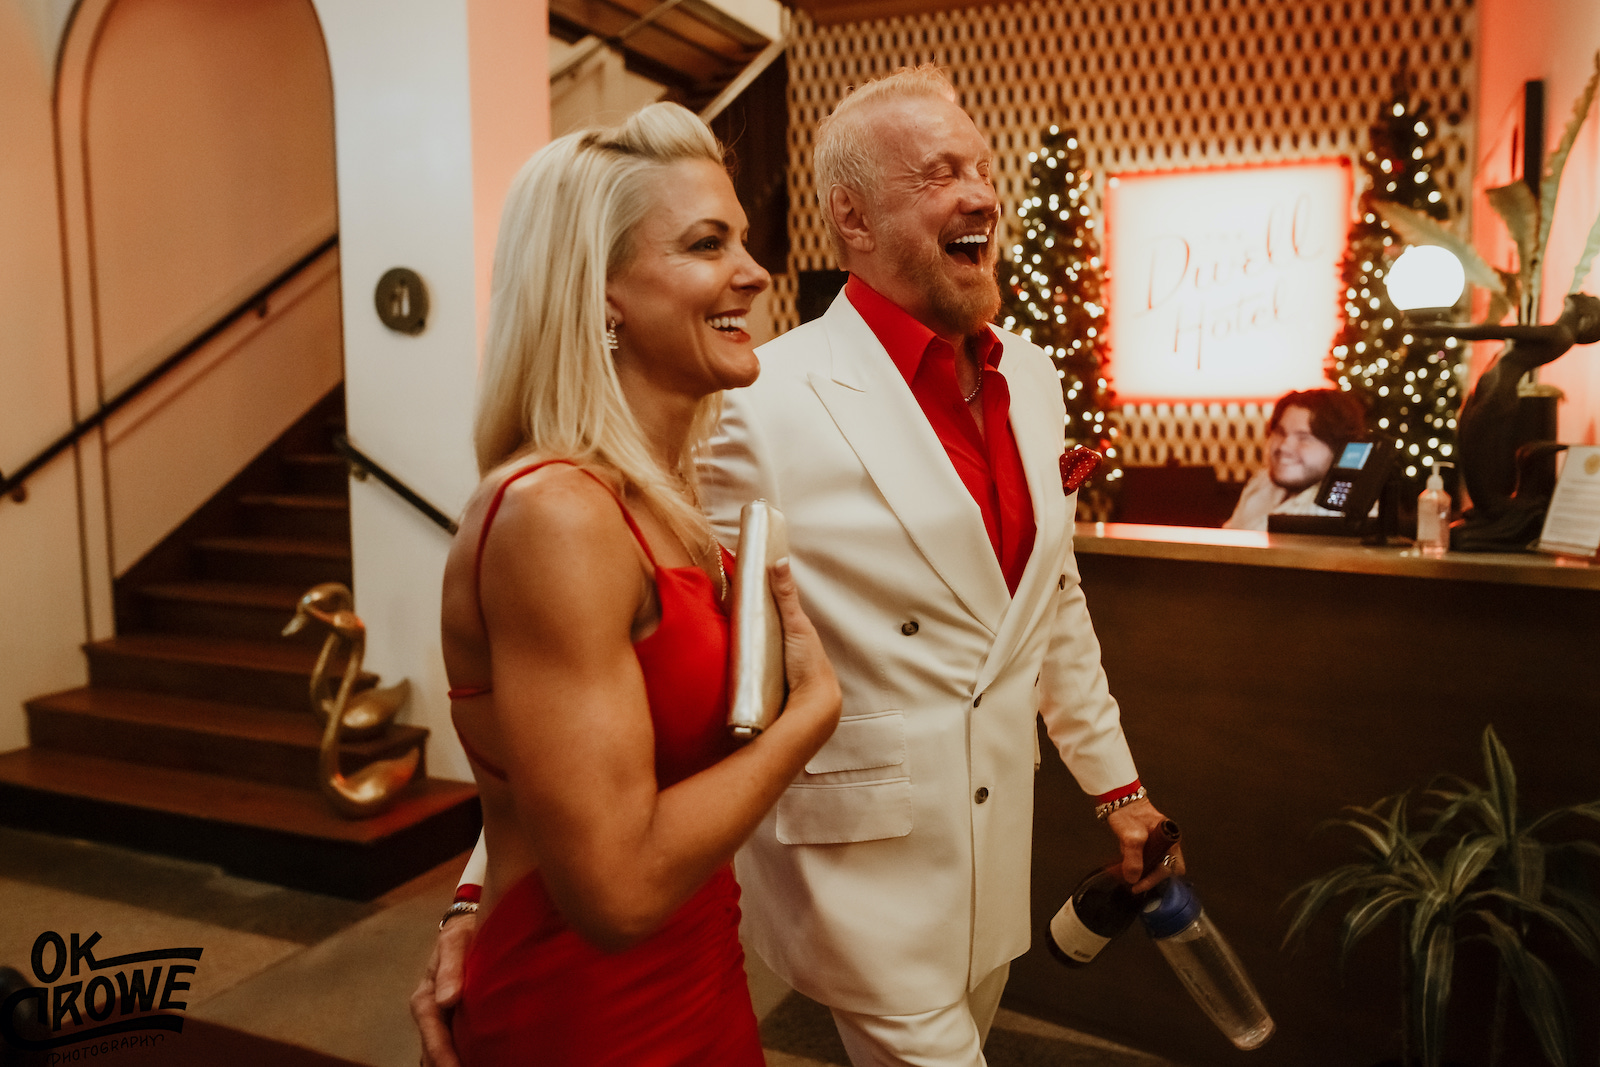 Diamond Dallas Page's surprise wedding proposal to Payge McMahon at The Dwell Hotel in downtown Chattanooga